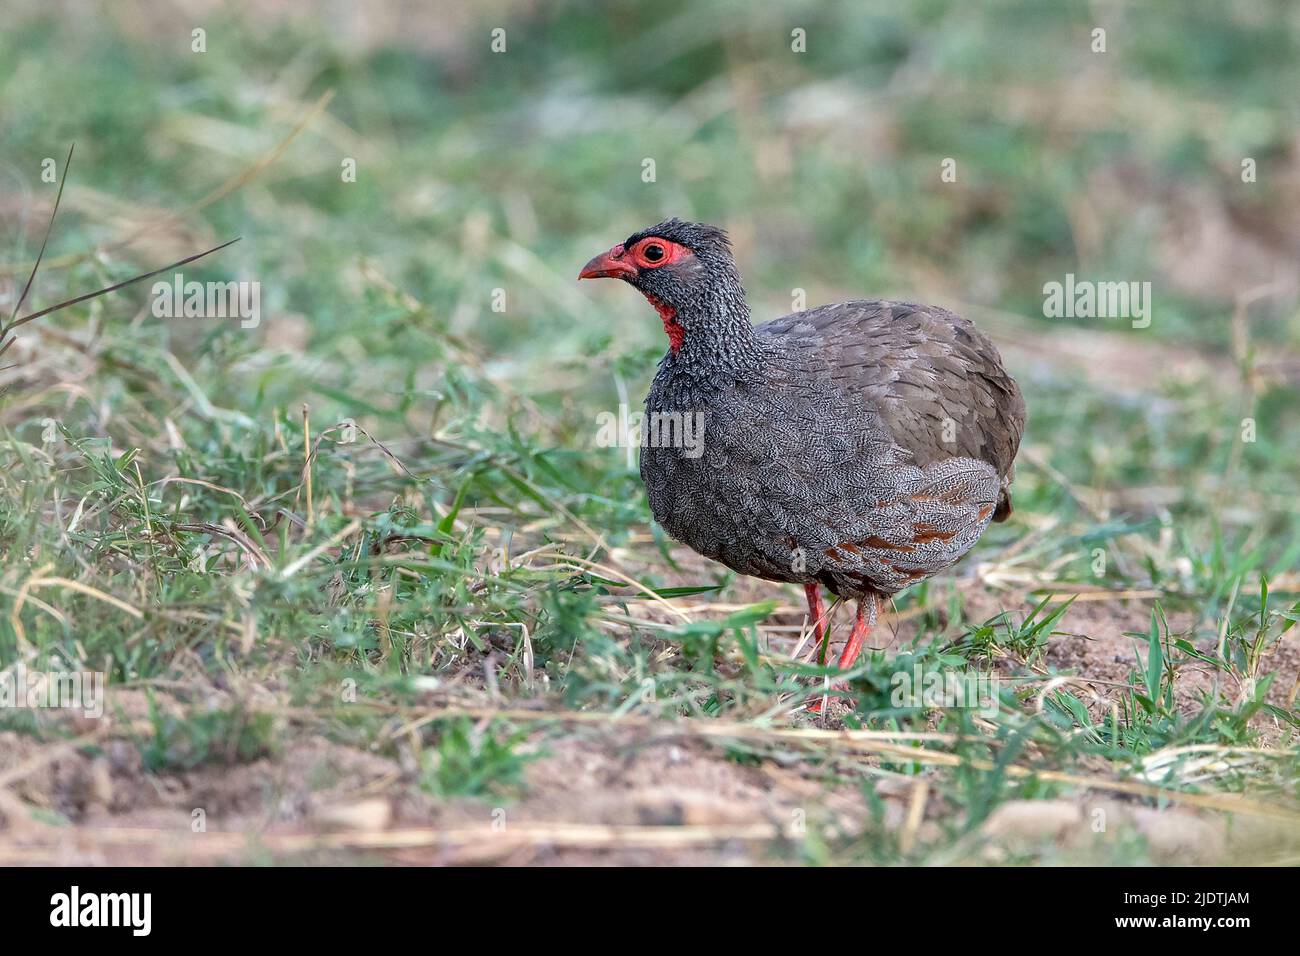 Red-necked spurfowl (Pternistis afer) from Maasai Mara, Kenya. Stock Photo